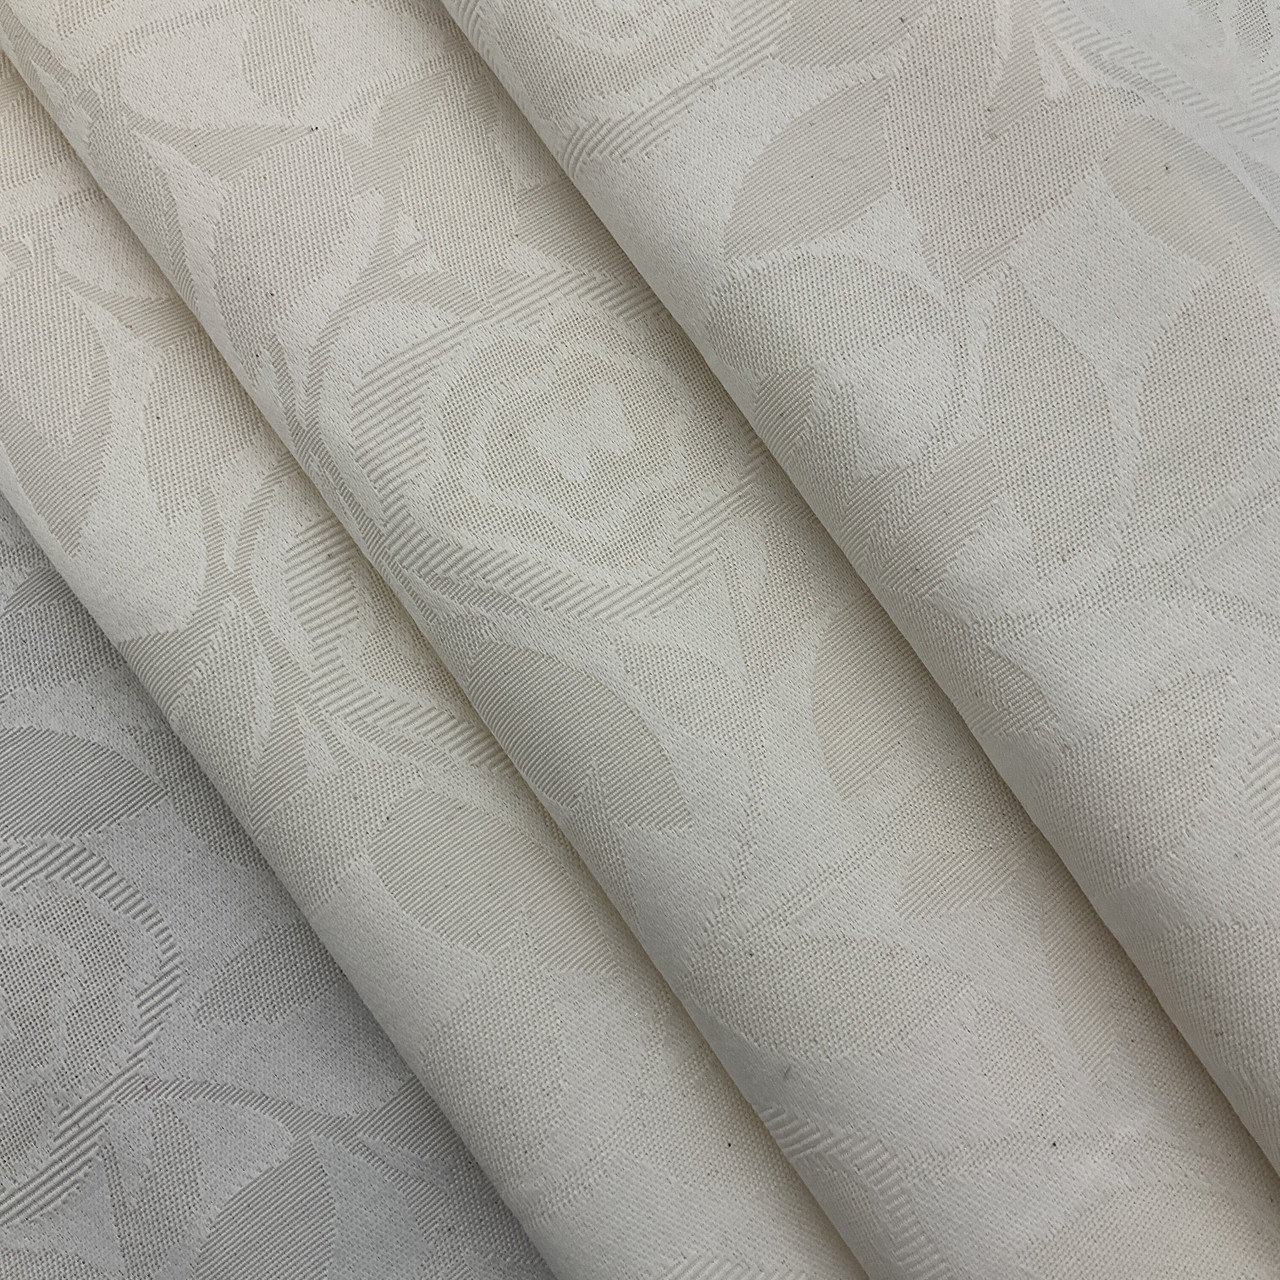 Floral Brocade in Ivory Off-White | Medium Weight Upholstery / Slipcover  Fabric | 54 Wide | By the Yard